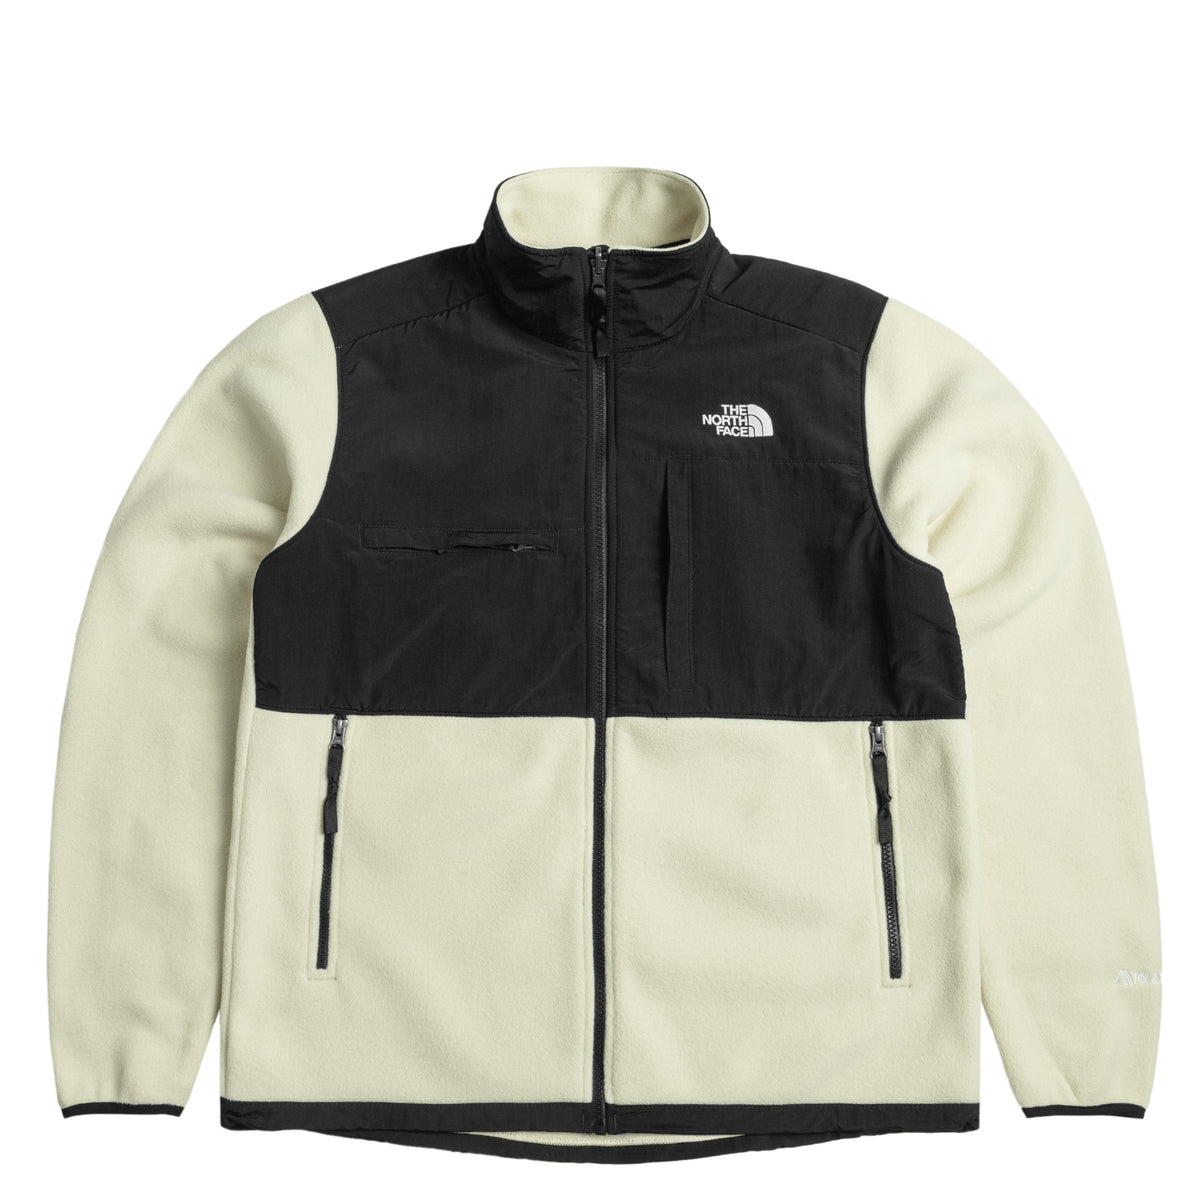 The North Face Fleece Printed Denali 2 Jacket in White Womens Mens Clothing Mens Jackets Casual jackets 